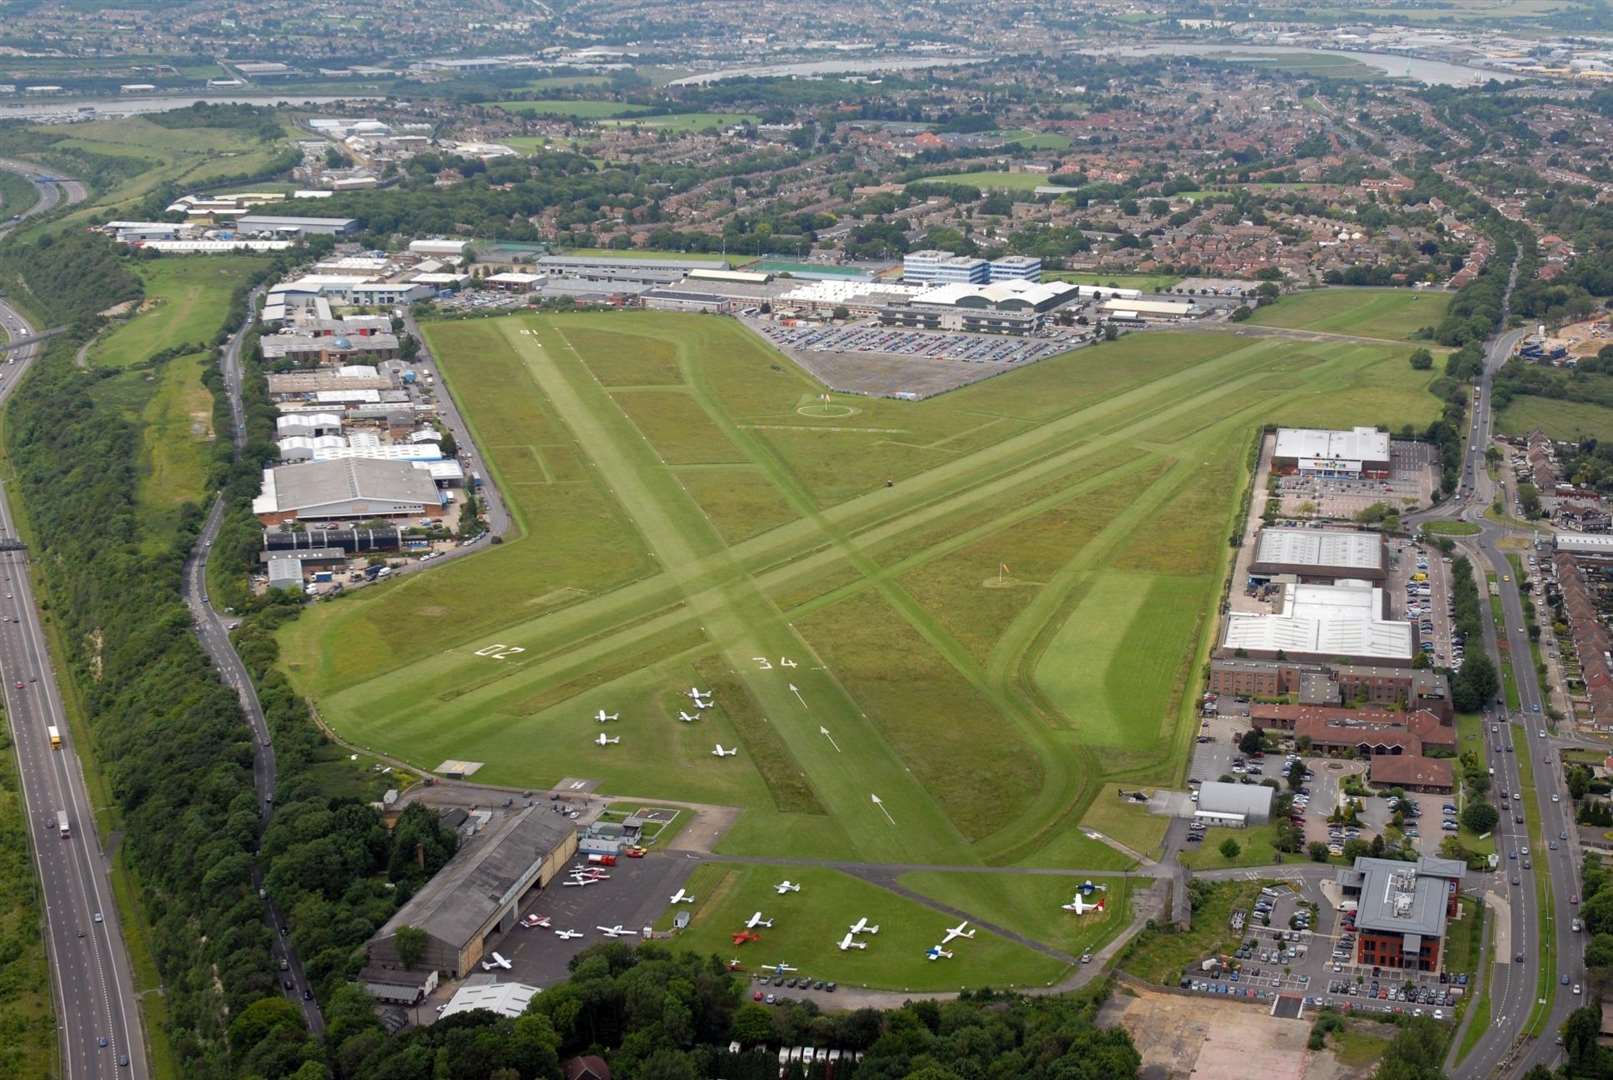 The expansion of Rochester Airport is one of the projects allocated money from the Government's £1.4 billion Local Growth Fund by the South East LEP